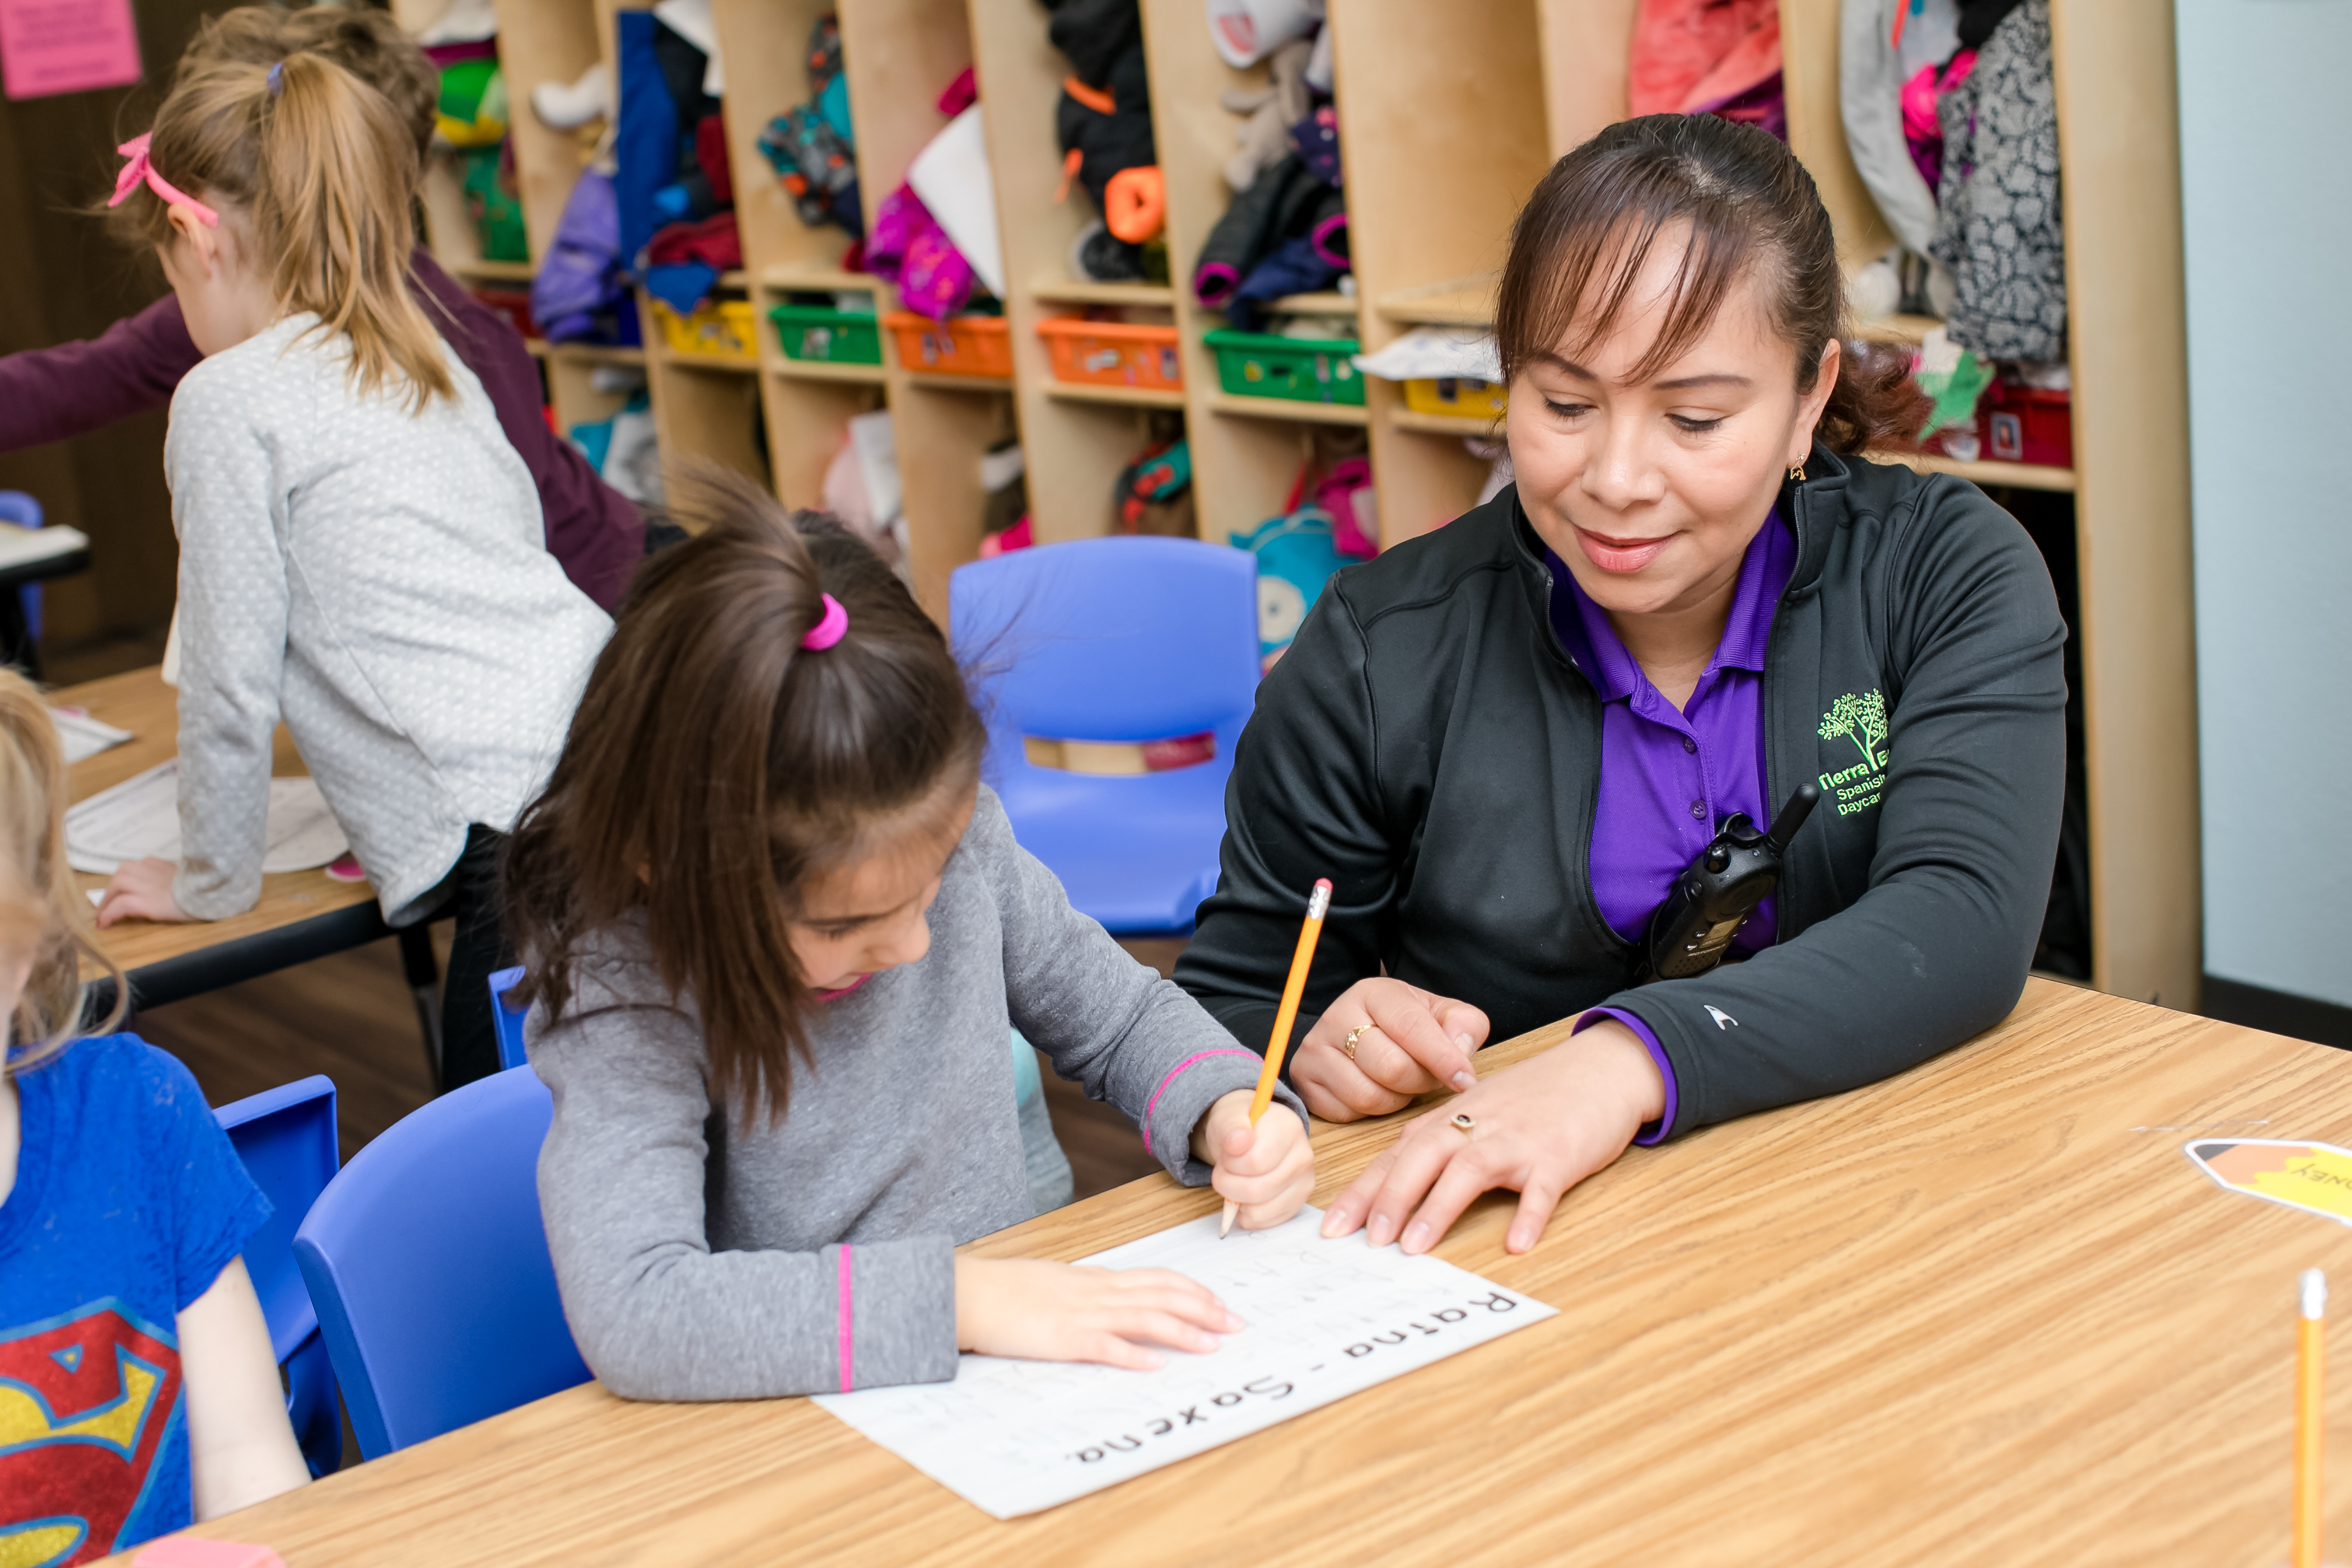 A teacher helps a student with a writing activity